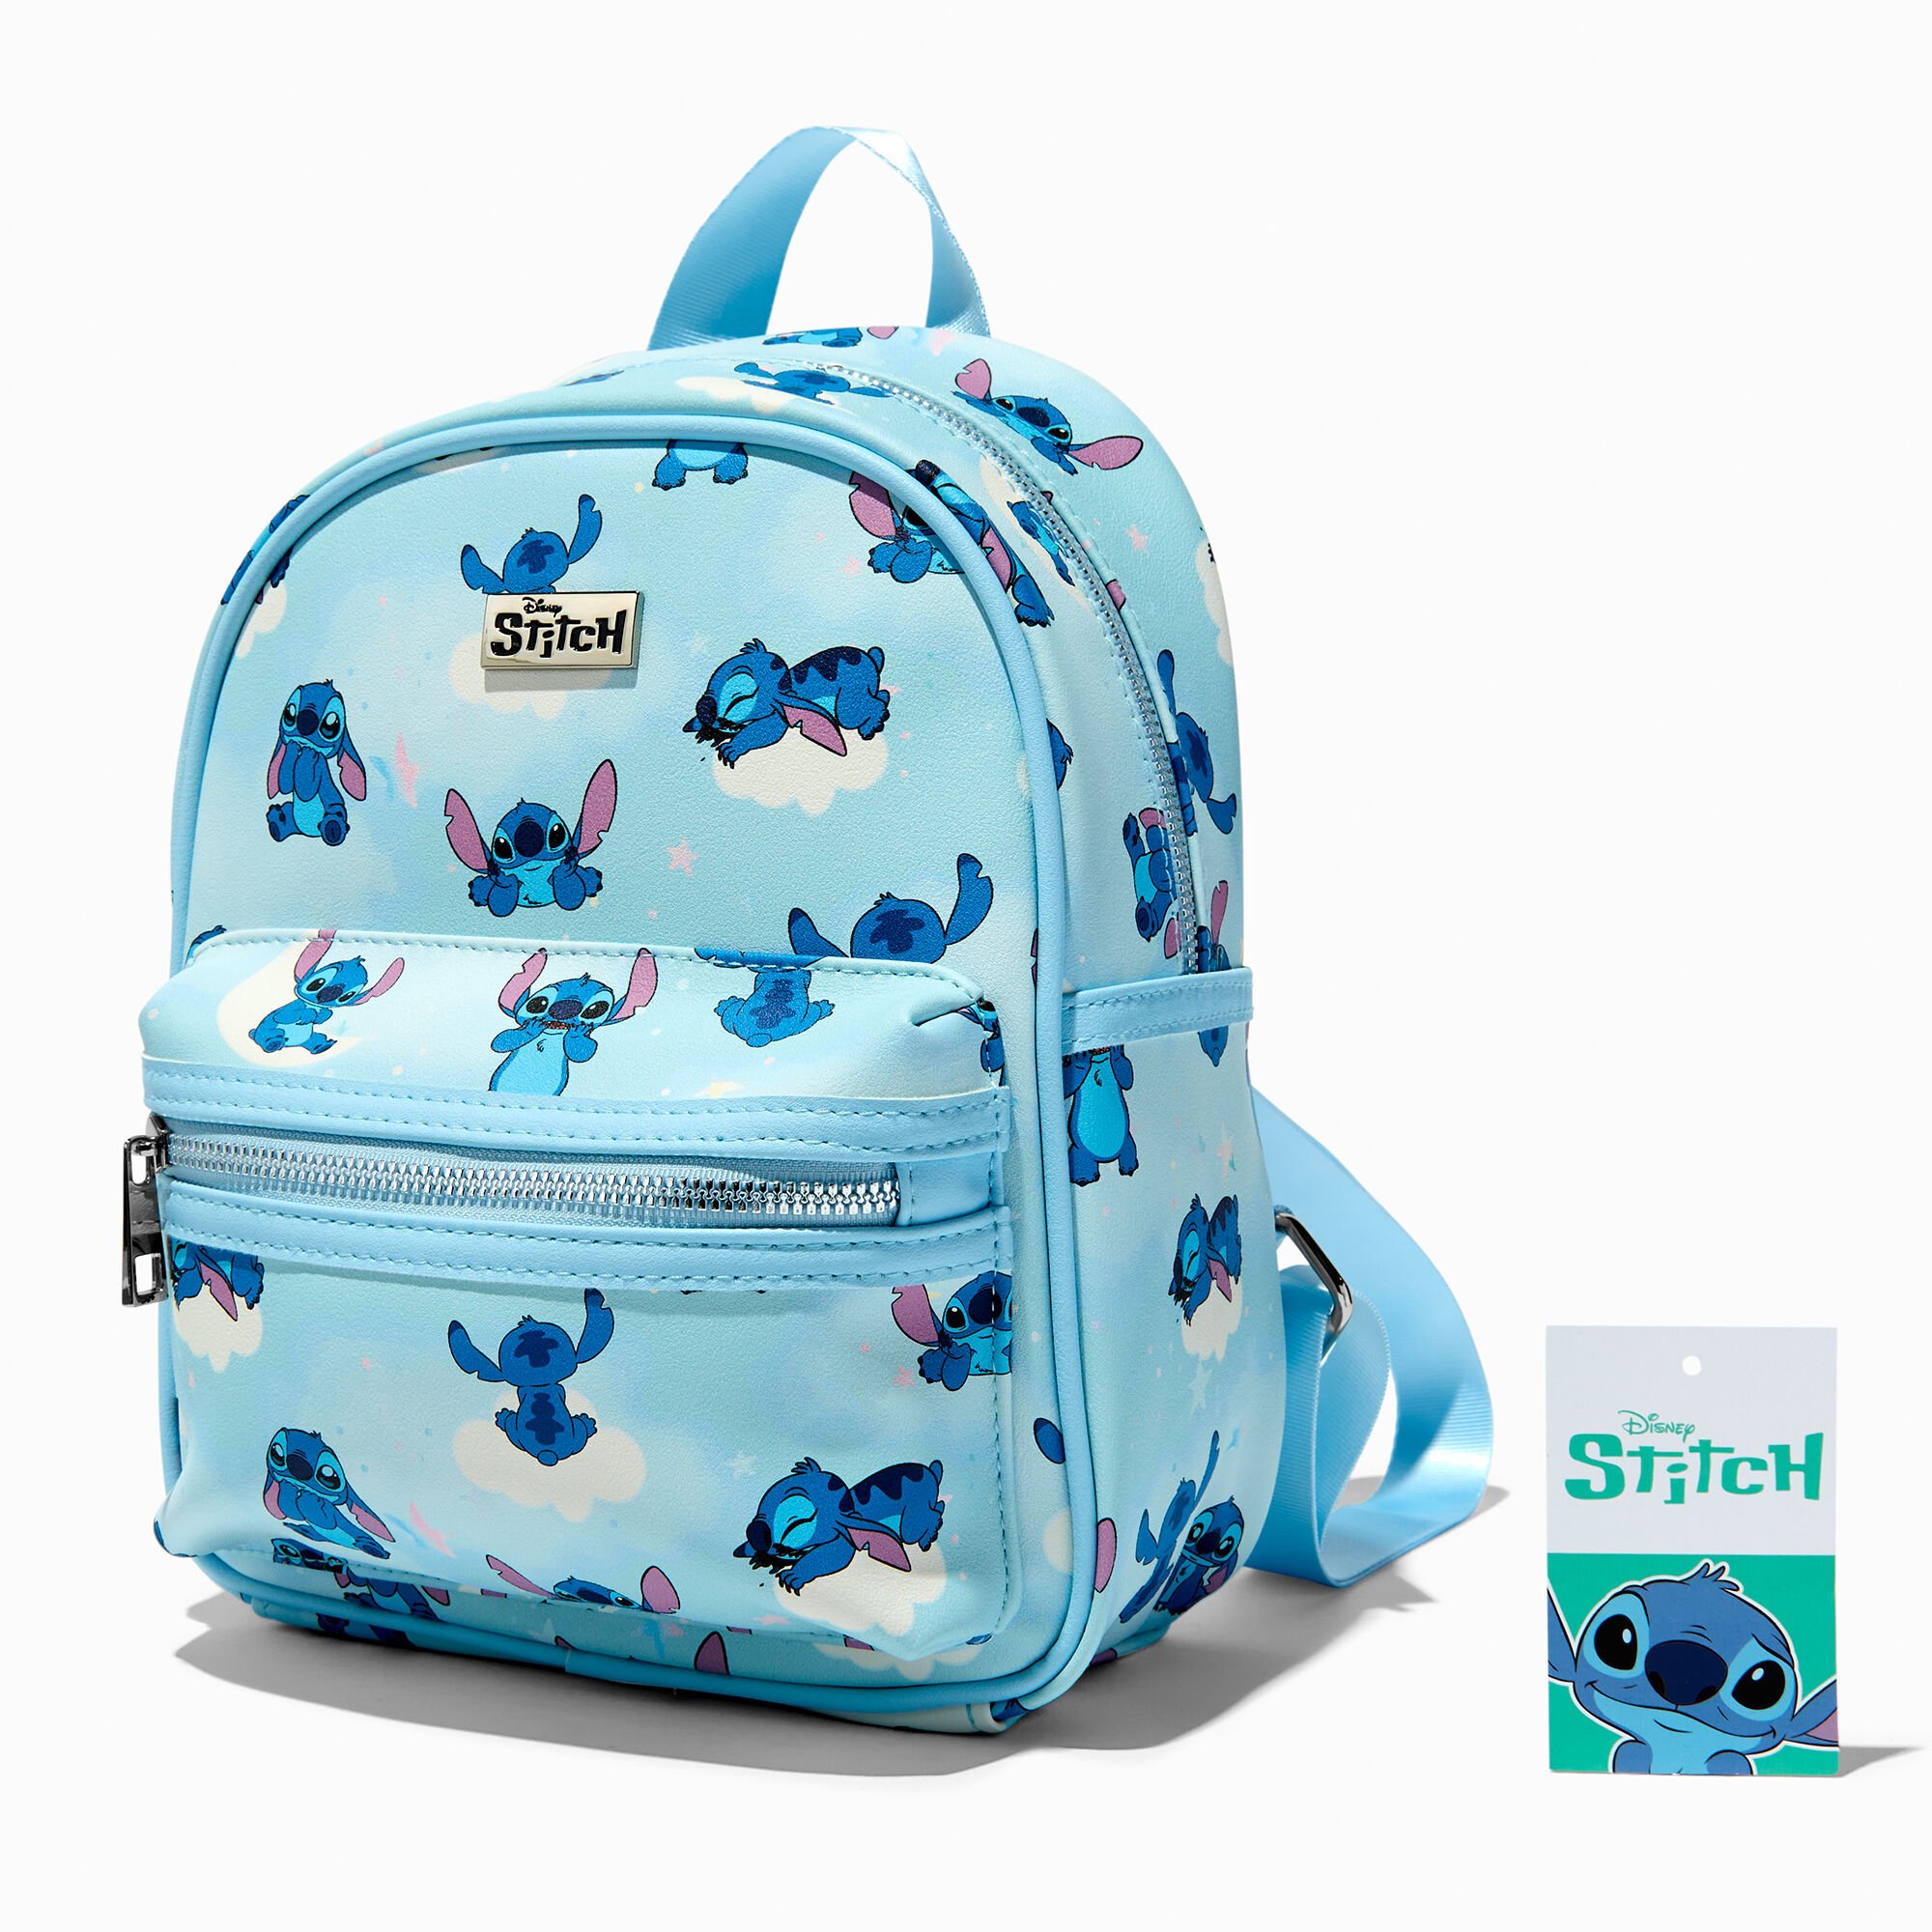 View Claires Disney Stitch Sleepy Backpack information